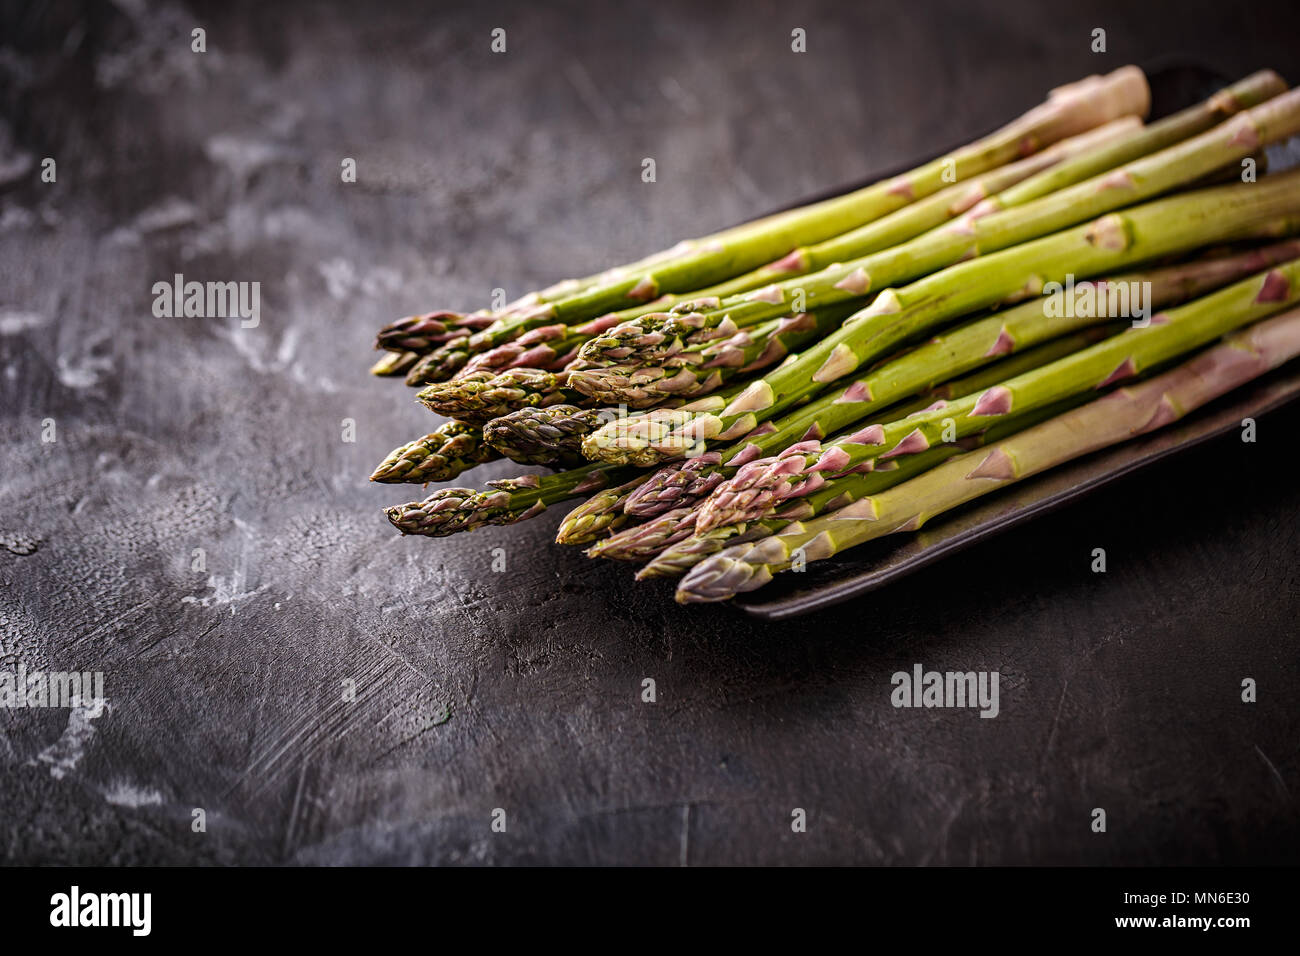 Fresh picked aspargus in horizontal format on black background Stock Photo